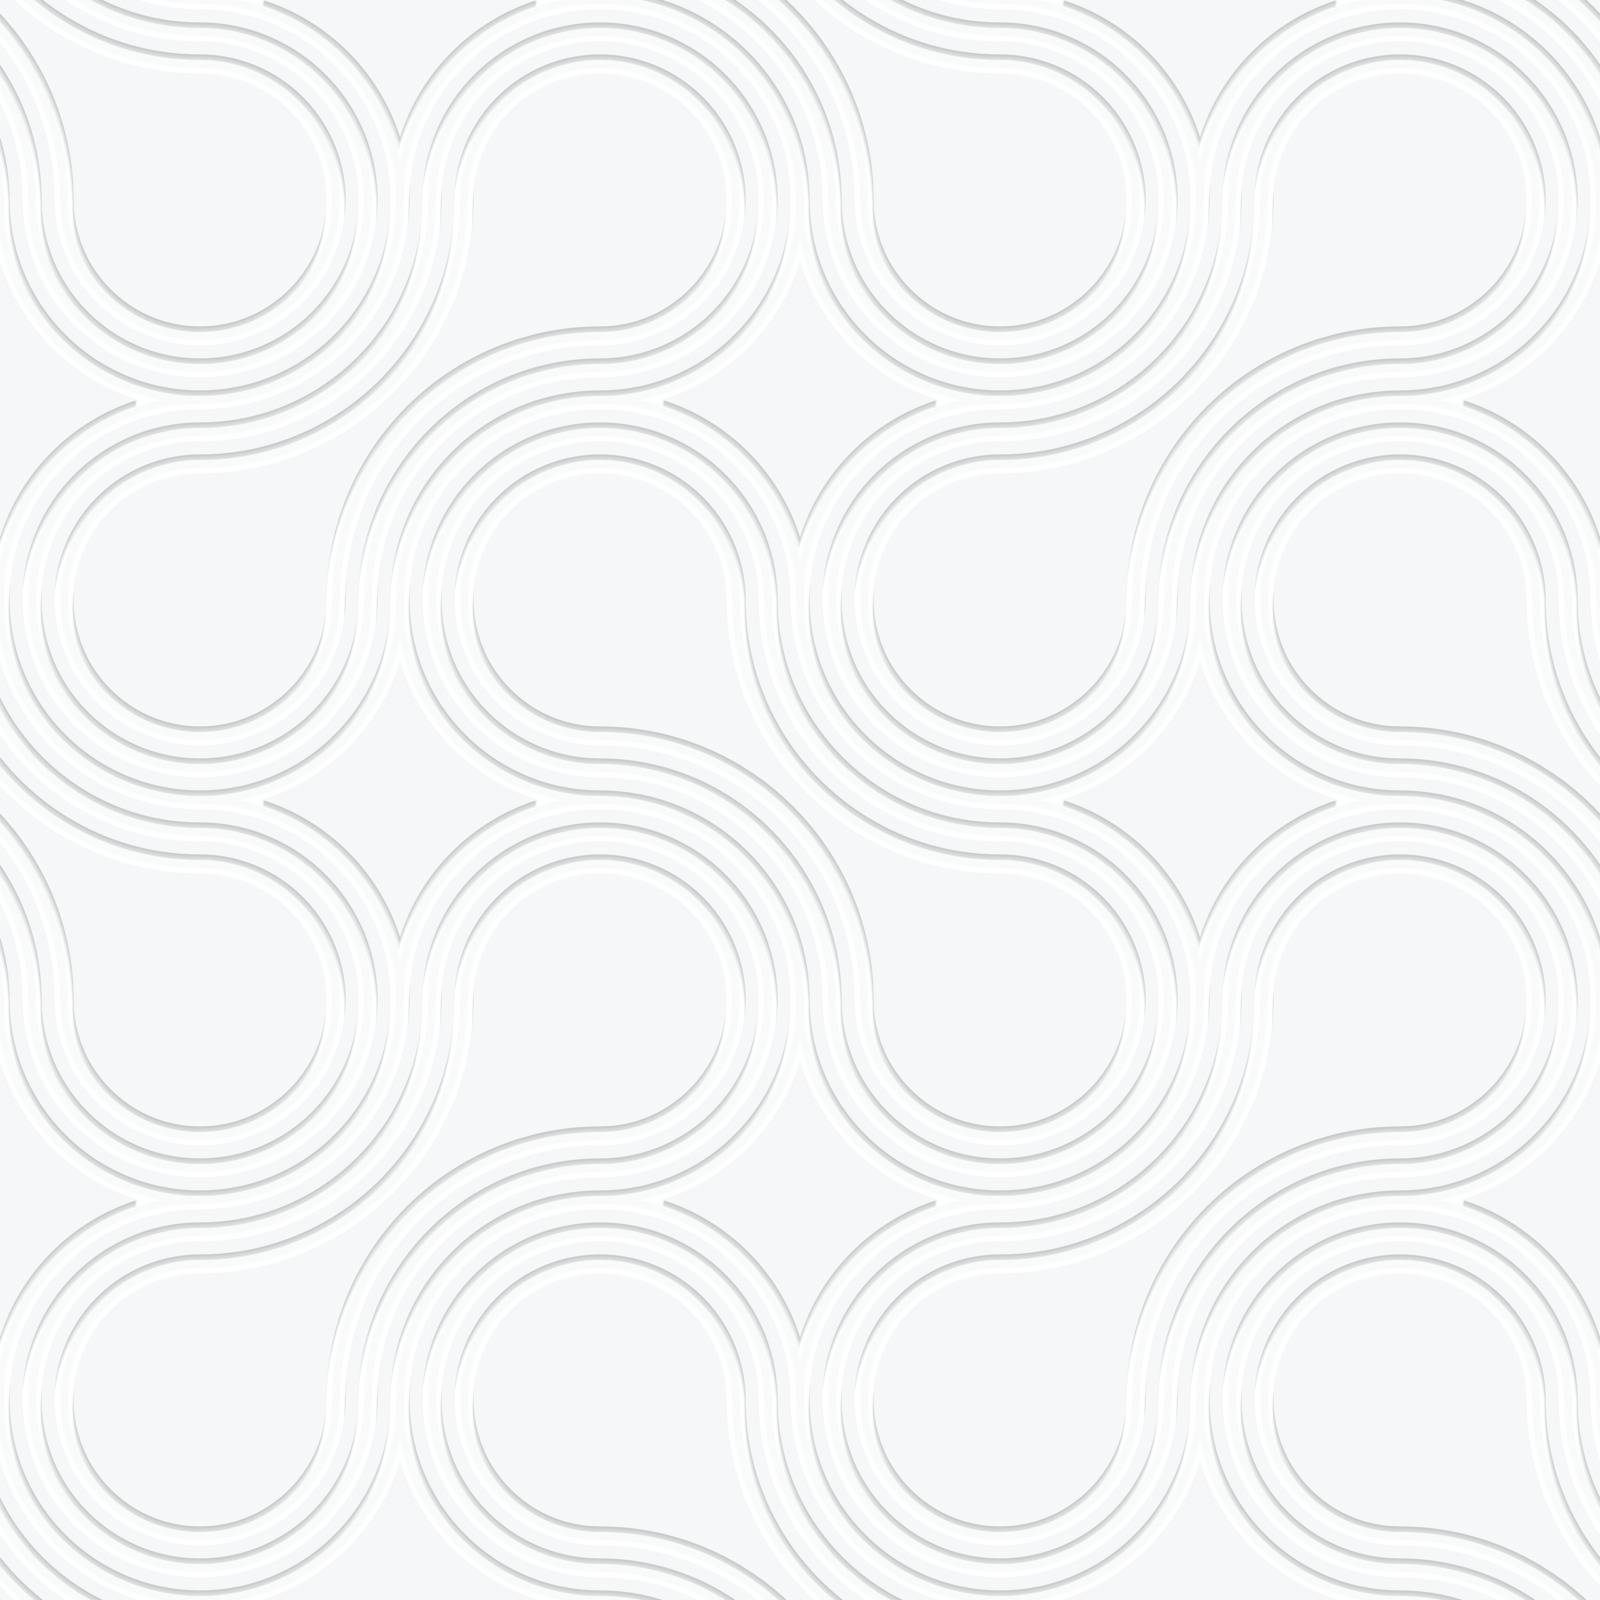 Seamless geometric background. Modern monochrome 3D texture. Pattern with realistic shadow and cut out of paper effect.3D white rounded shapes with offset perforated.